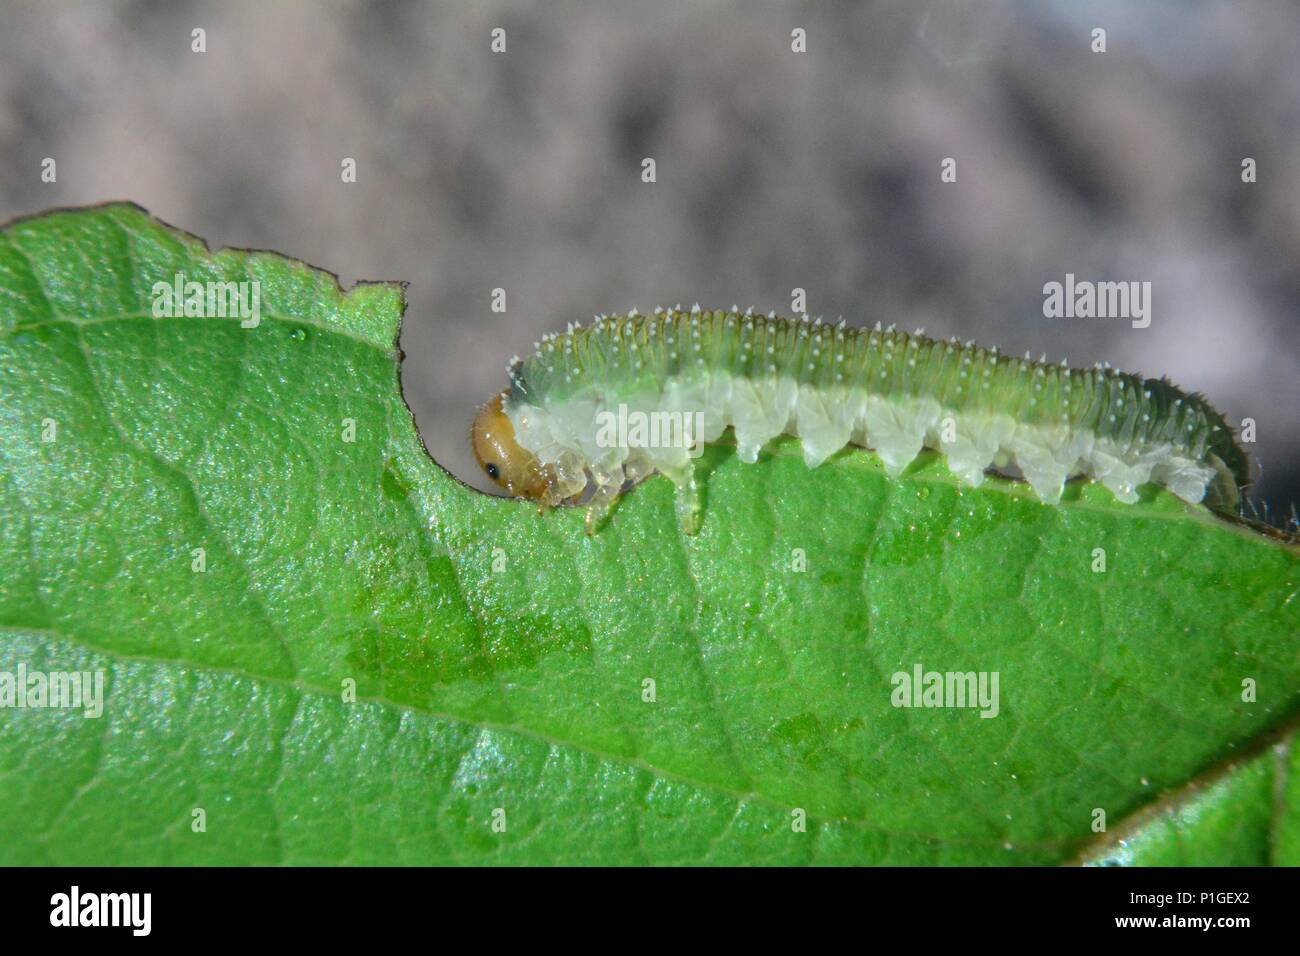 Green caterpillar on a leaf Stock Photo